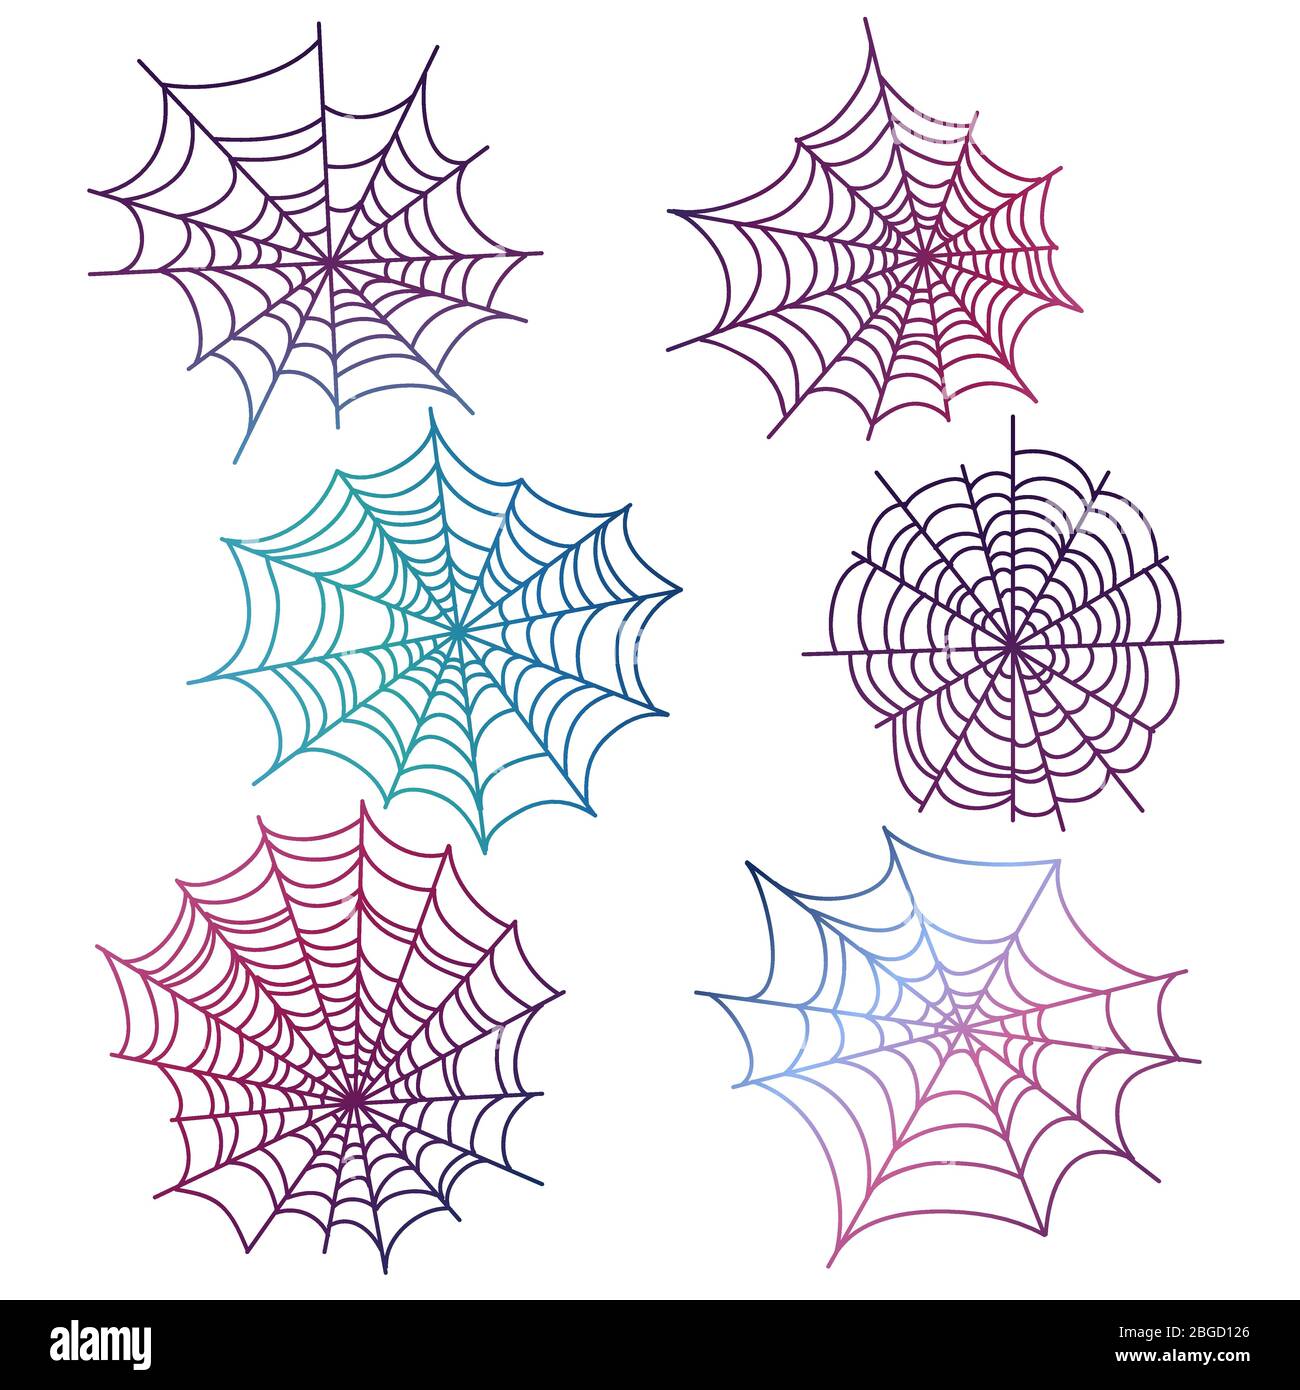 Colorful spider web of set isolated on white background. Vector illustration Stock Vector